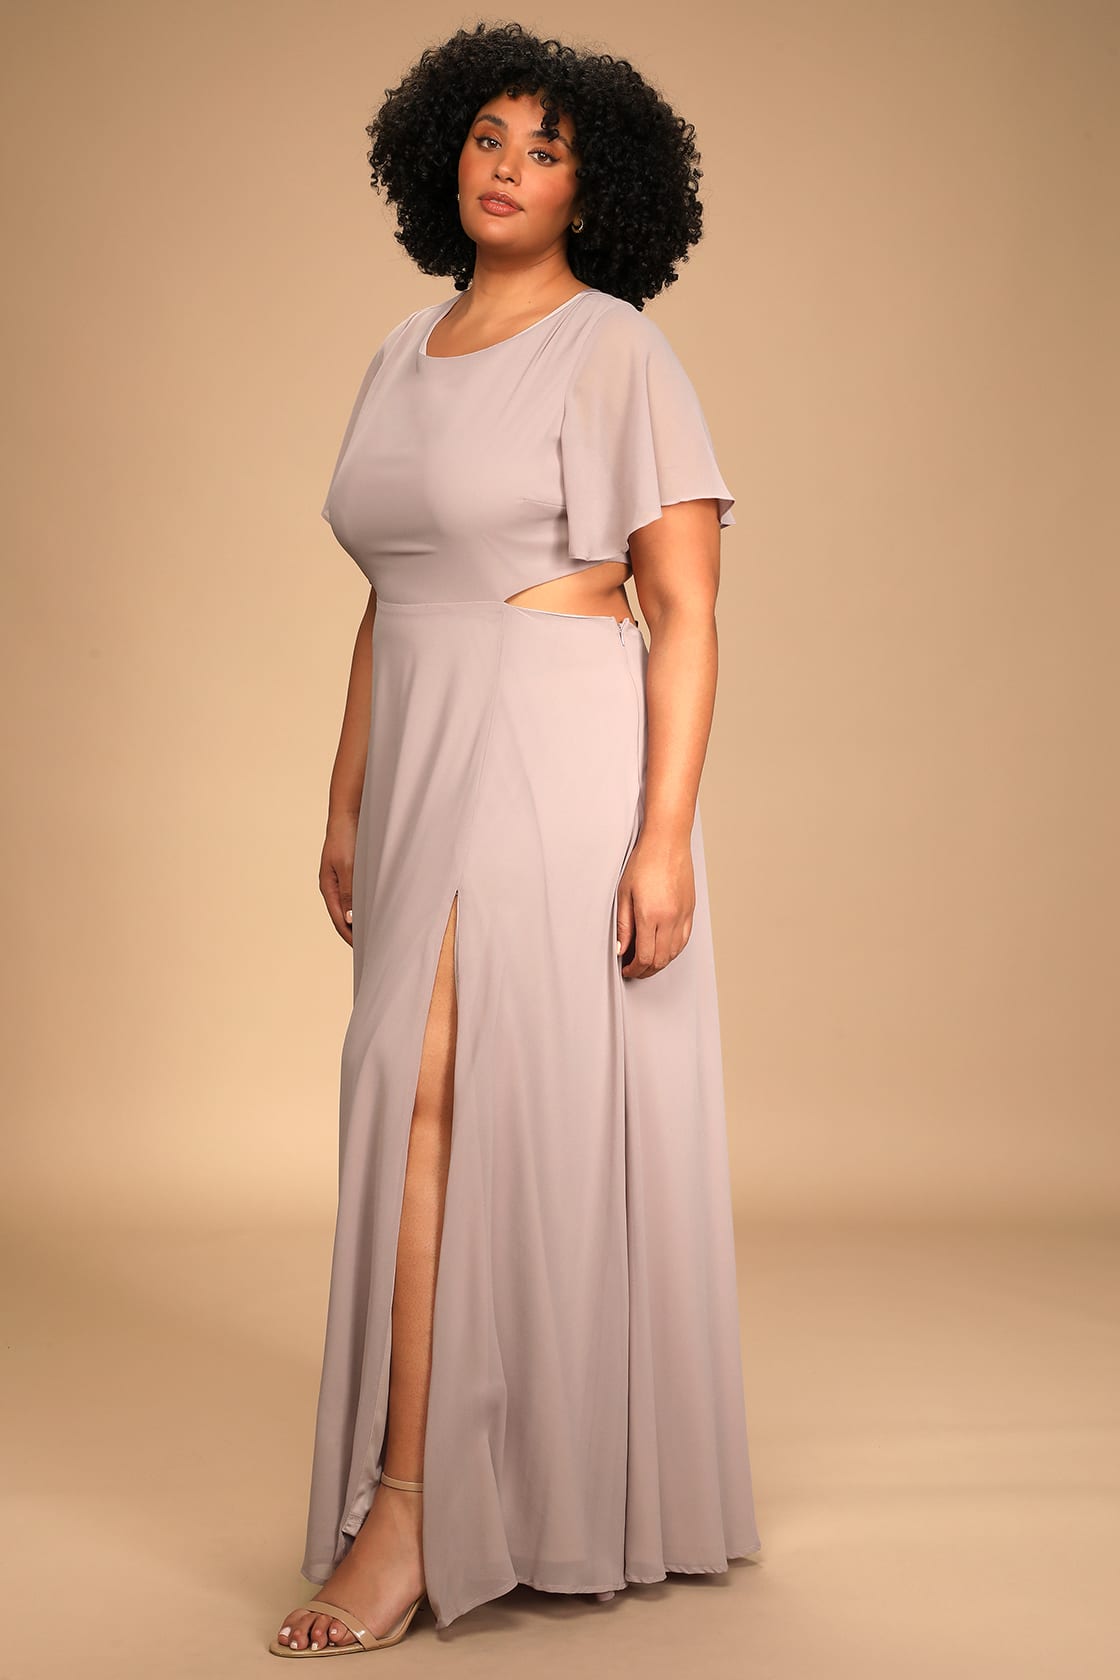 Plus Size Purple Wedding Guest Dress with Cutouts for Palm Springs or Spring Wedding